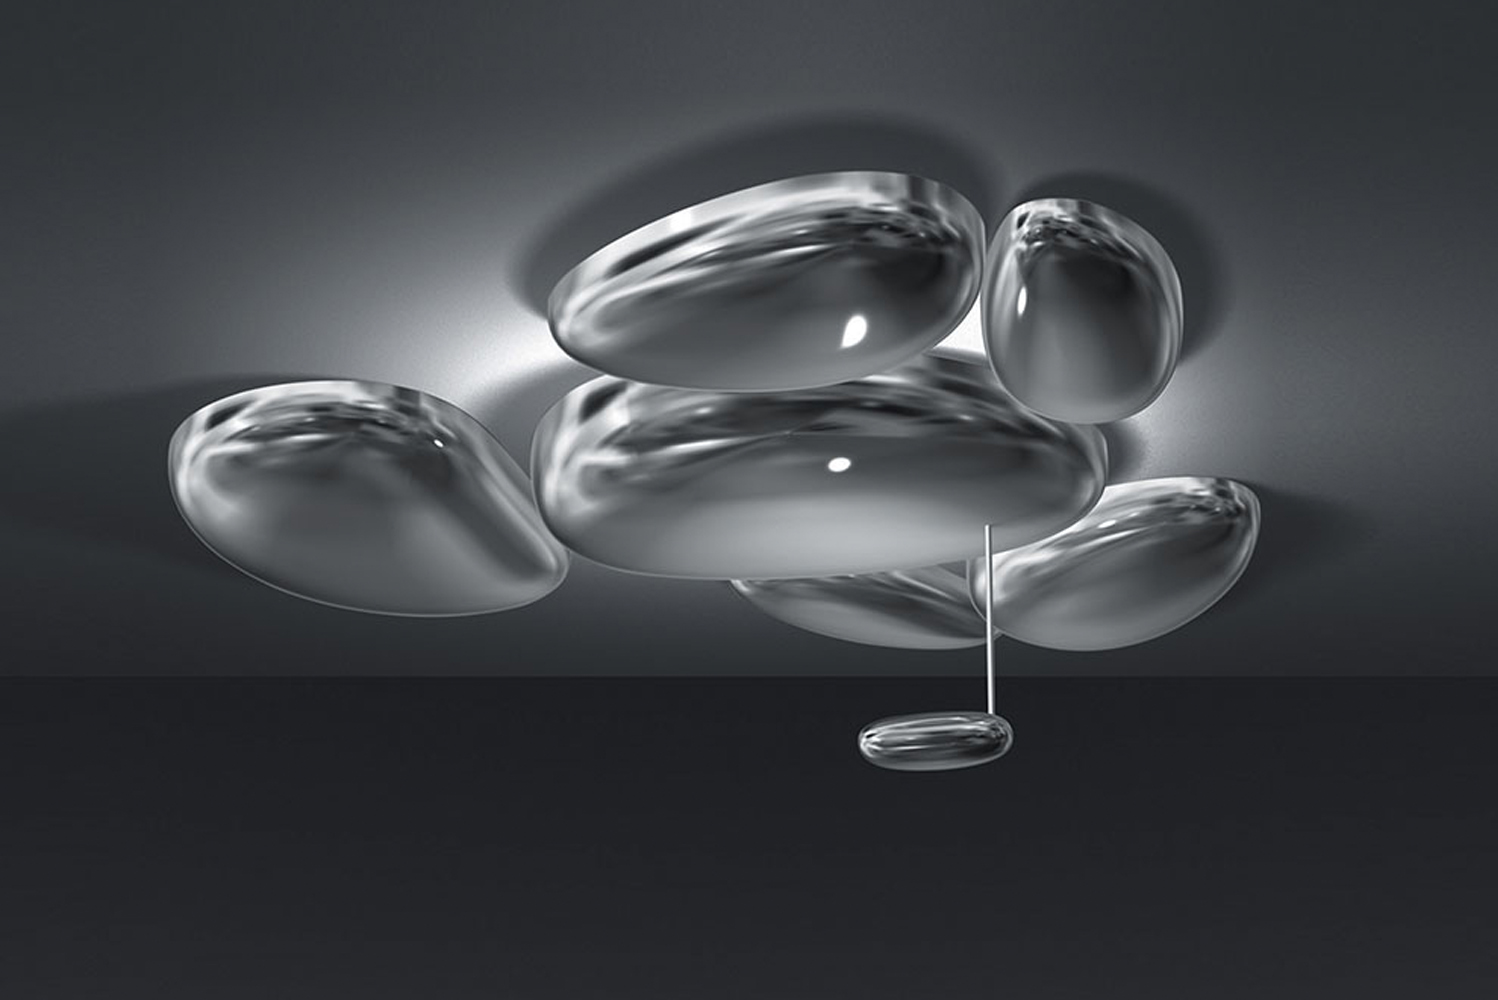 Introducing the Skydro ceiling lamp a further development of the Hydro series from Artemide 